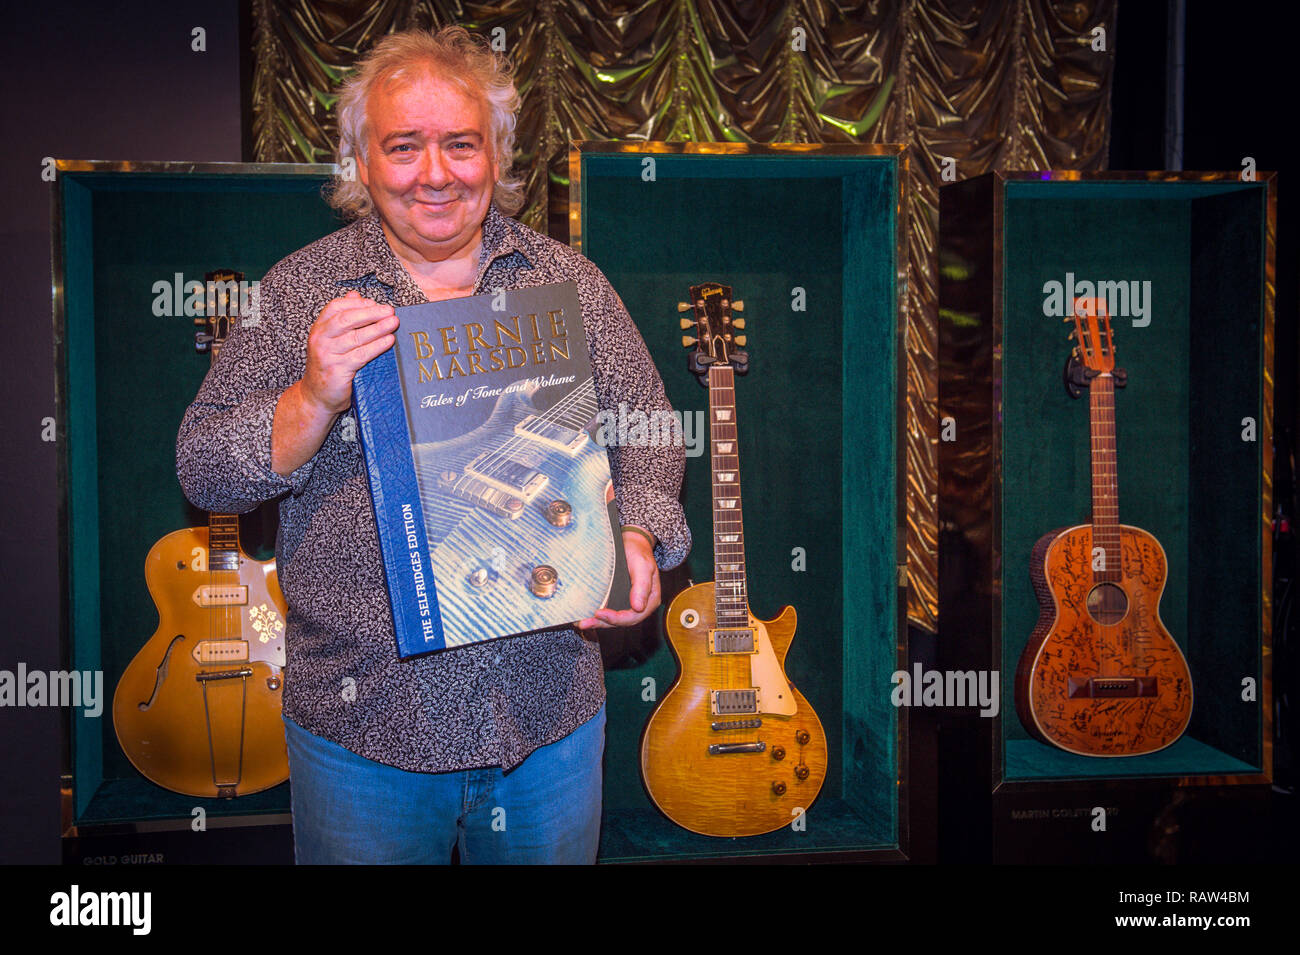 Whitesnake S Bernie Marsden Poses During An In Store Appearance At Selfridges Featuring Bernie Marsden Where London United Kingdom When 04 Dec 18 Credit Danny Clifford Hottwire Net Wenn Com Stock Photo Alamy